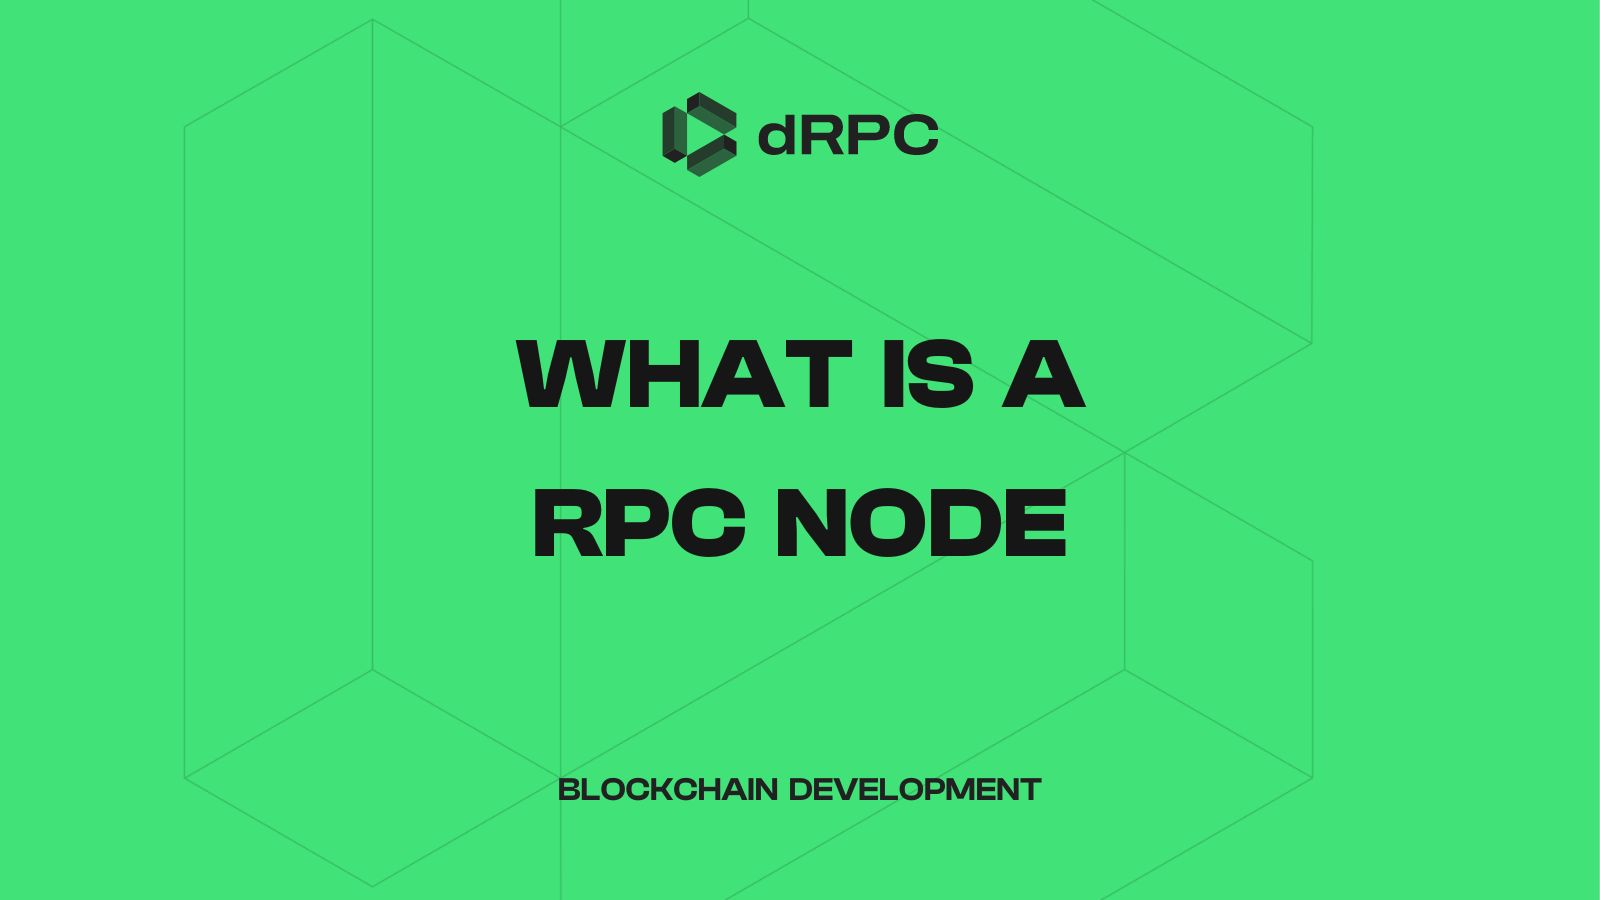 What is a RPC node?